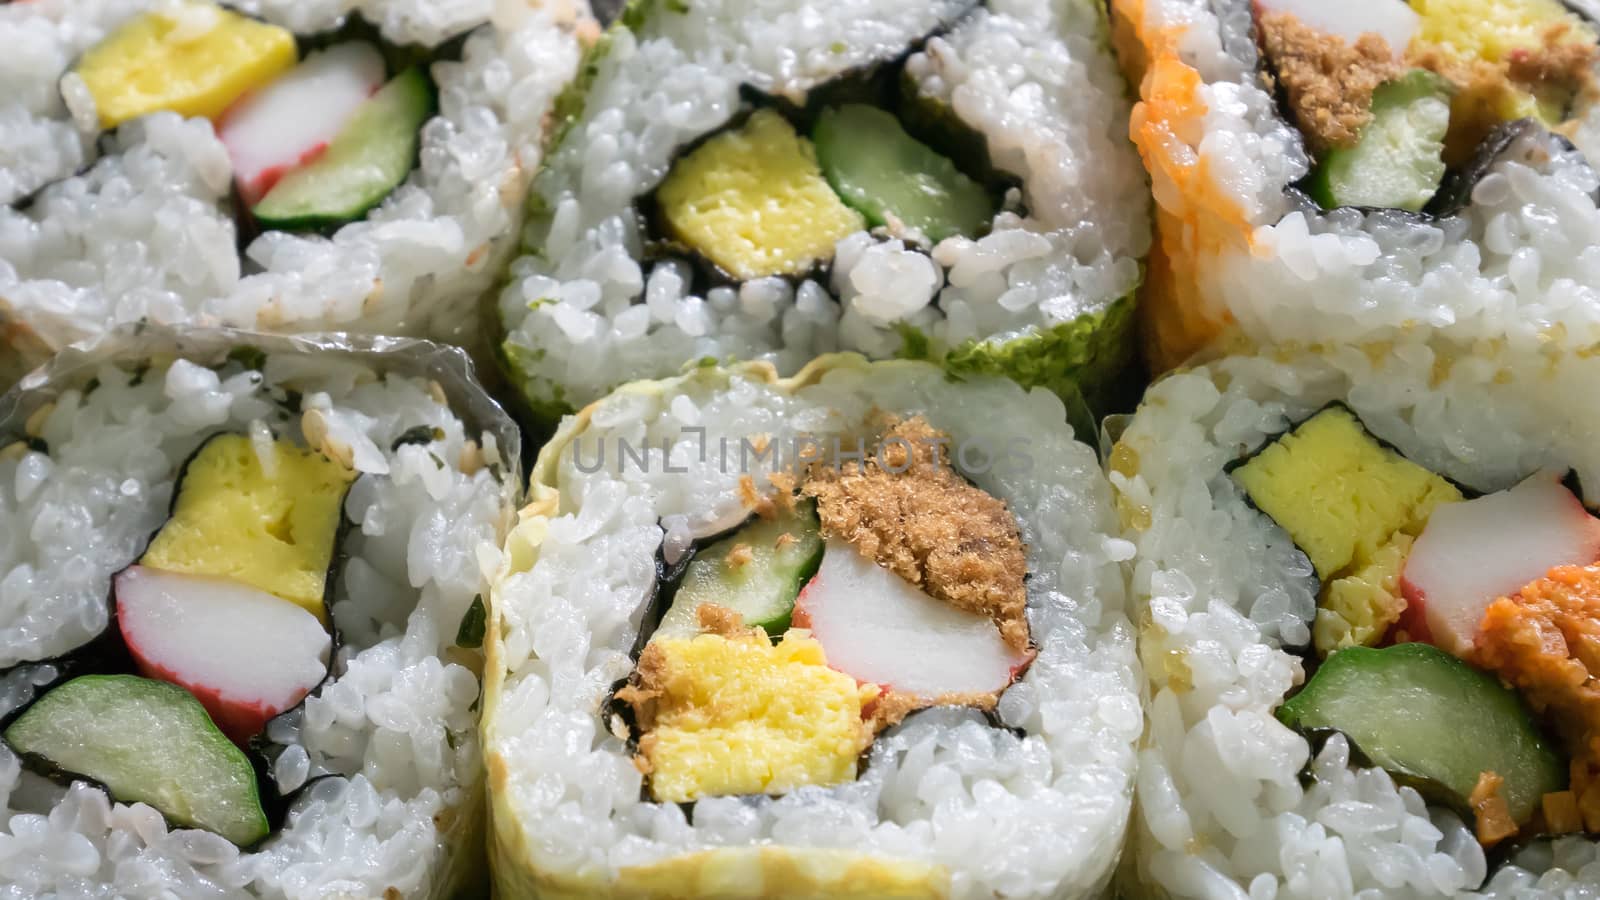 The close up of Japanese futomaki (sushi roll).